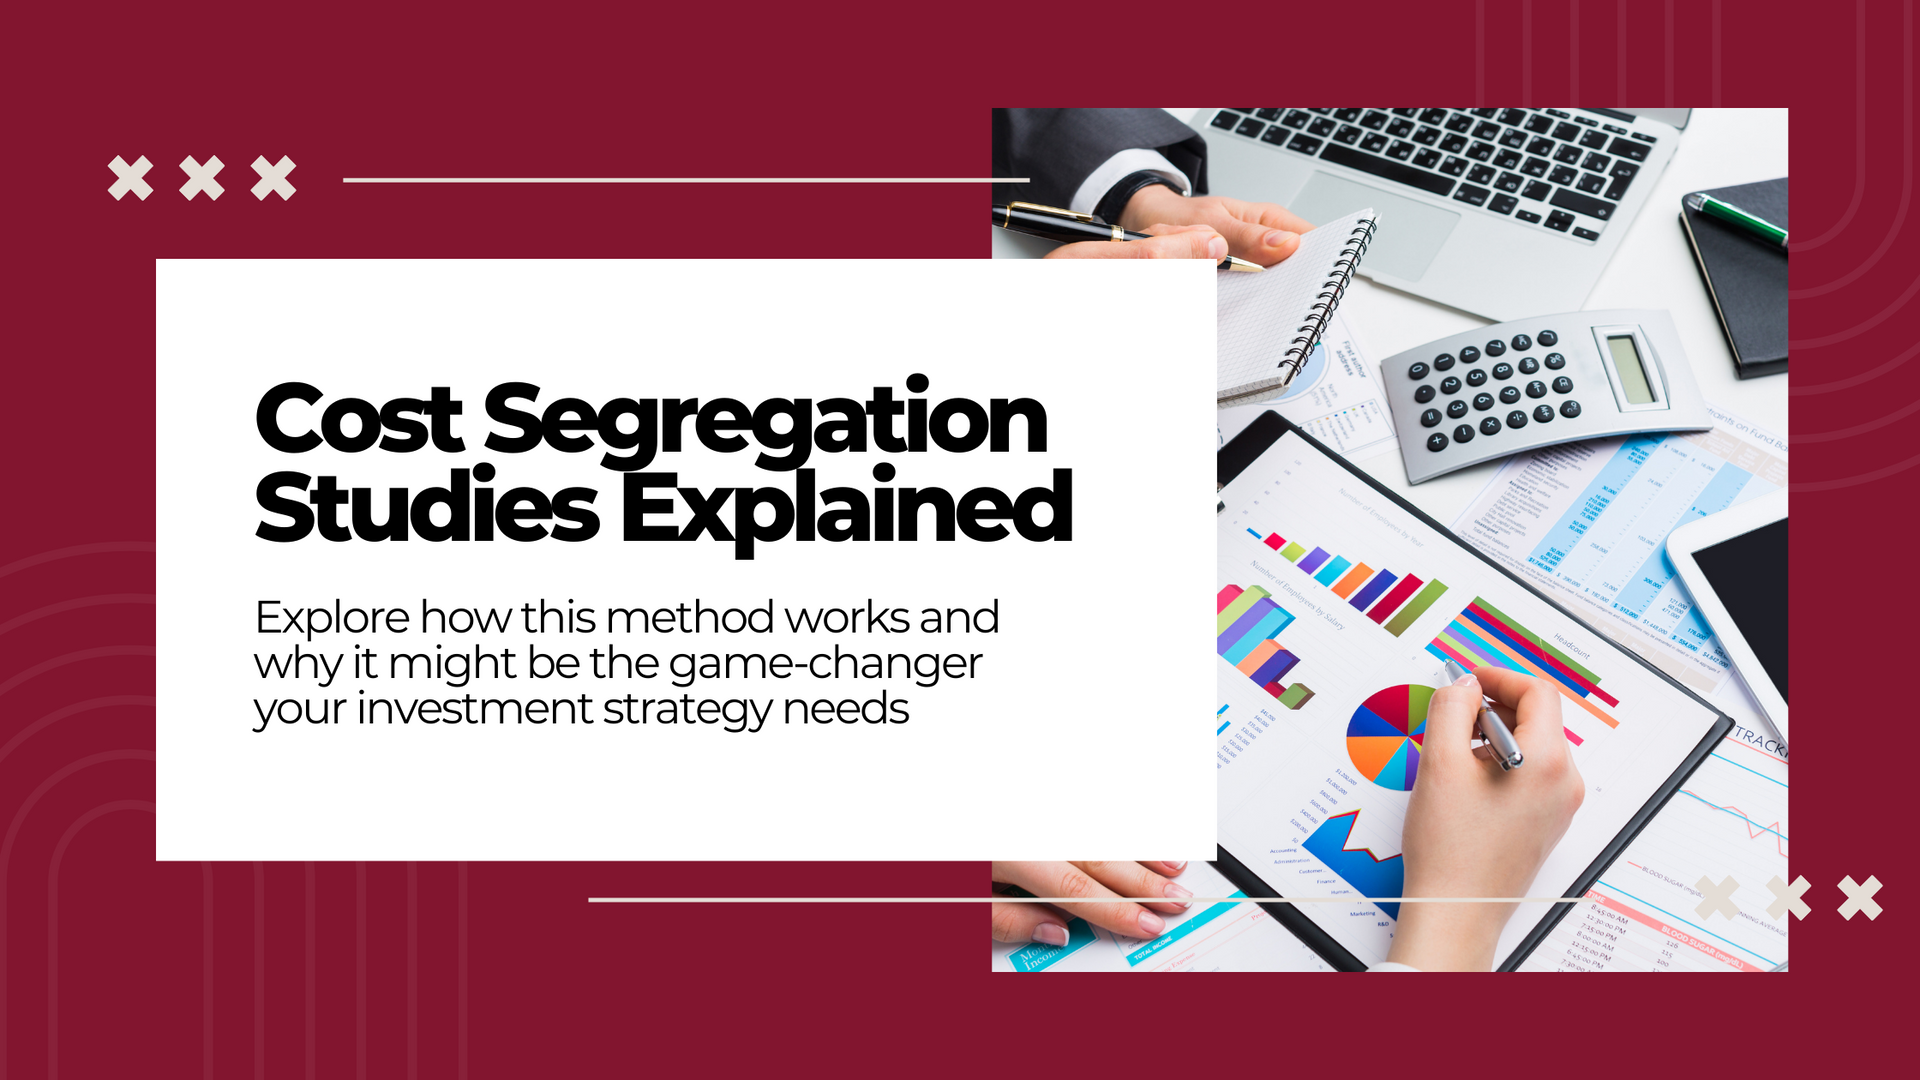 What are Cost Segregation Studies?